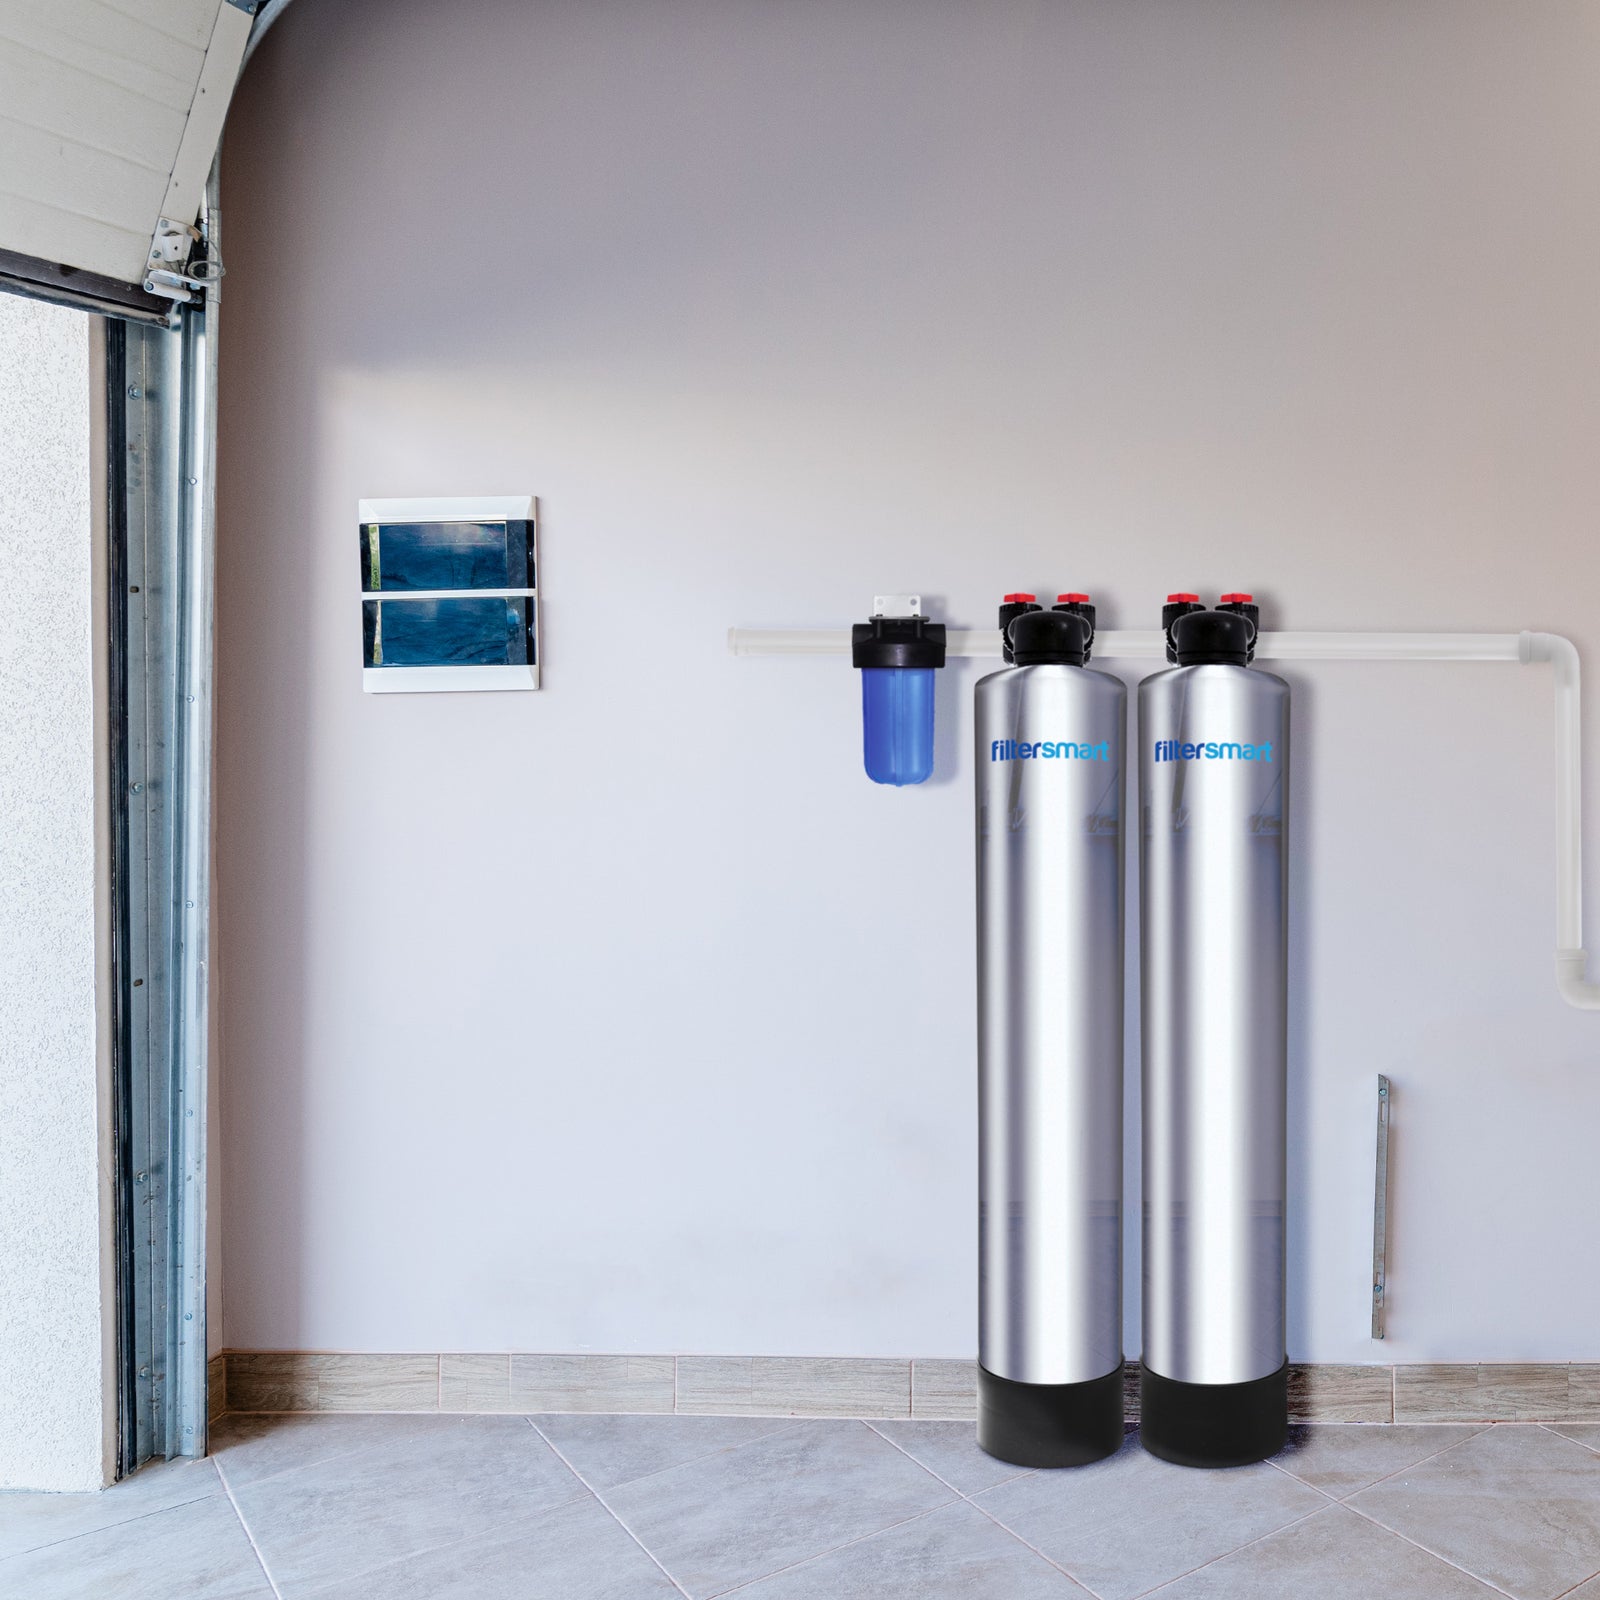 How Much Do Water Softeners Cost? Let's Break Down Price and Costs